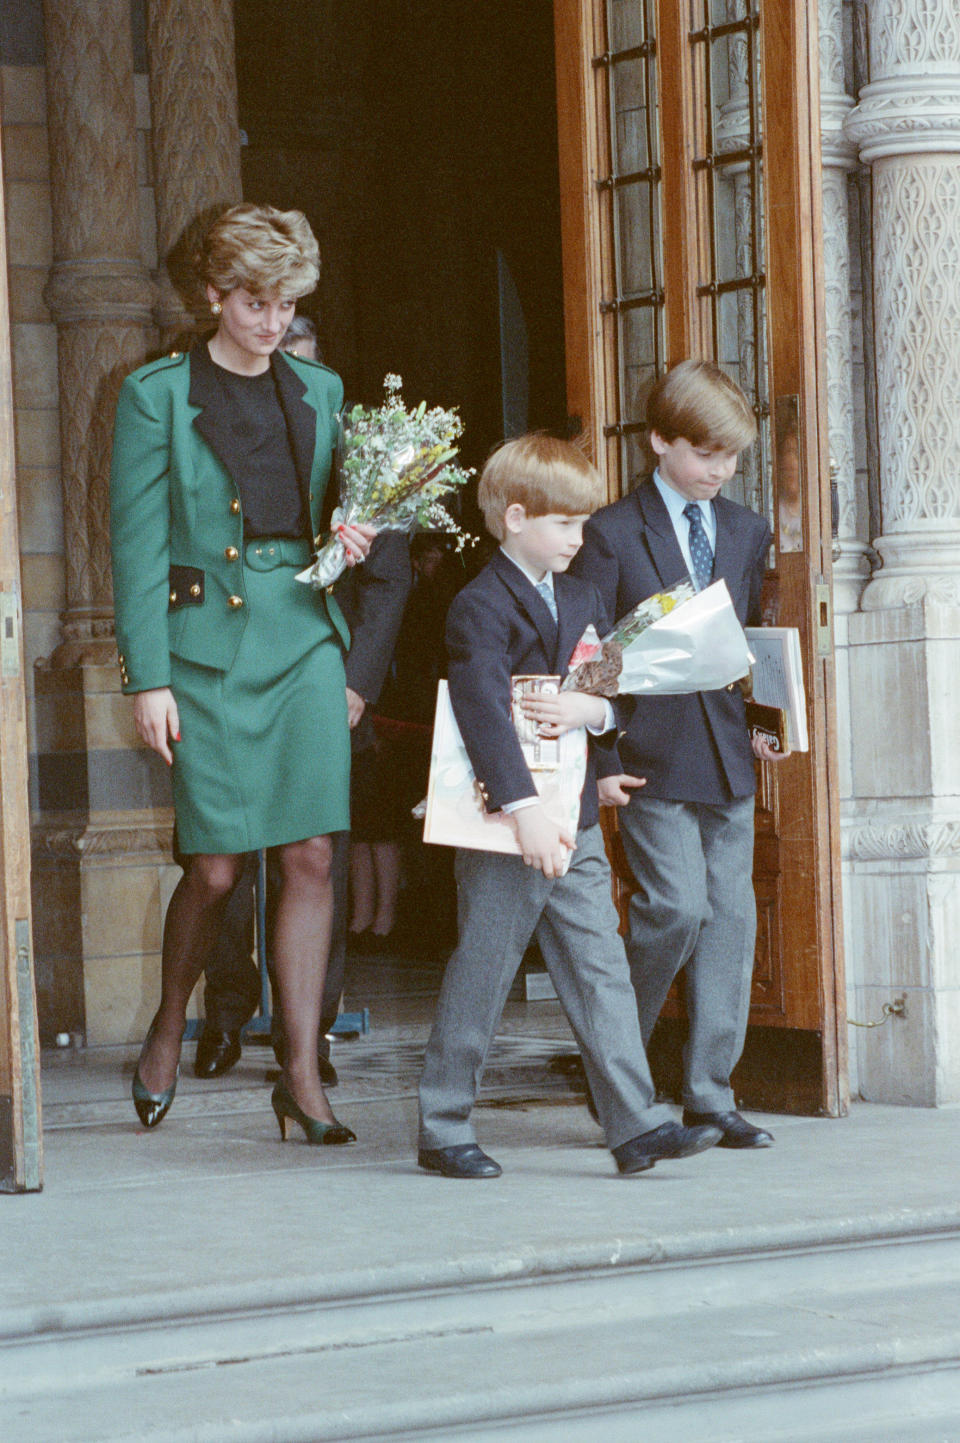 Princess Diana, Princess of Wales, takes her sons Prince William and Prince Harry to The National History Museum in London to the see Dinosaur Exhibition. Picture taken 13th April 1992. (Photo by Kent Gavin/Mirrorpix/Getty Images)